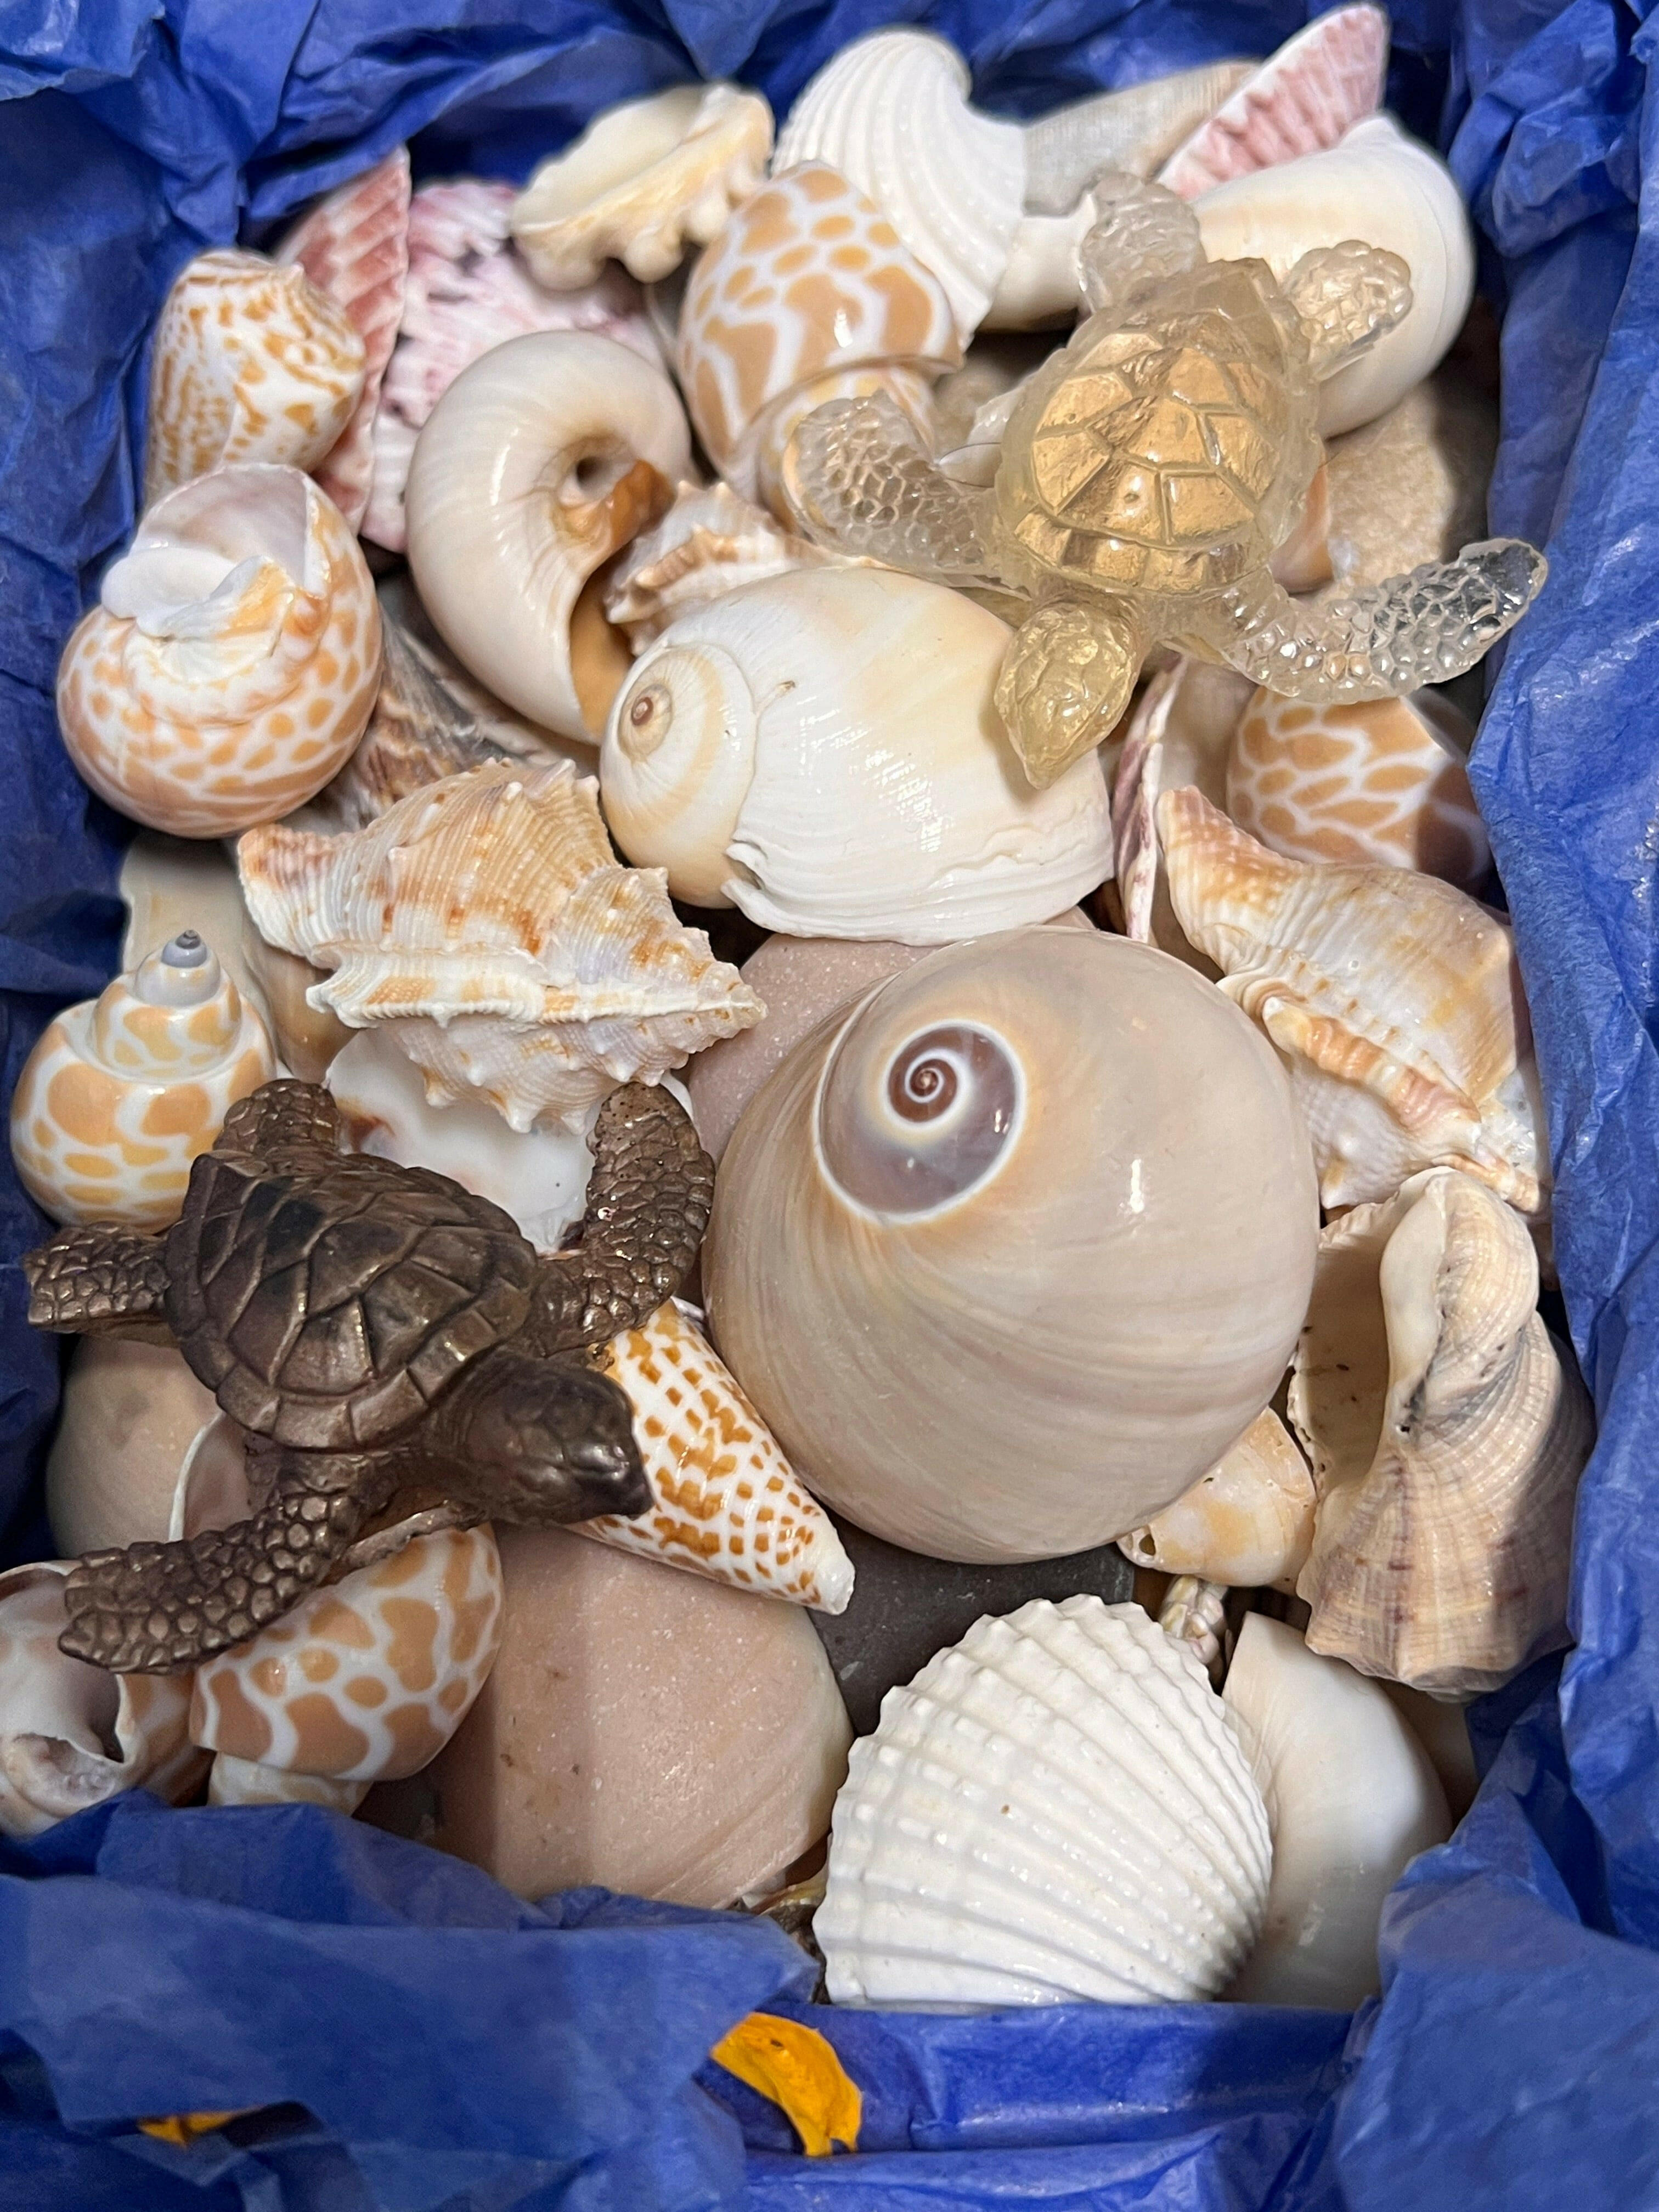 Beautiful Florida beach shells, sea glass treasures for sale - authentic ocean finds